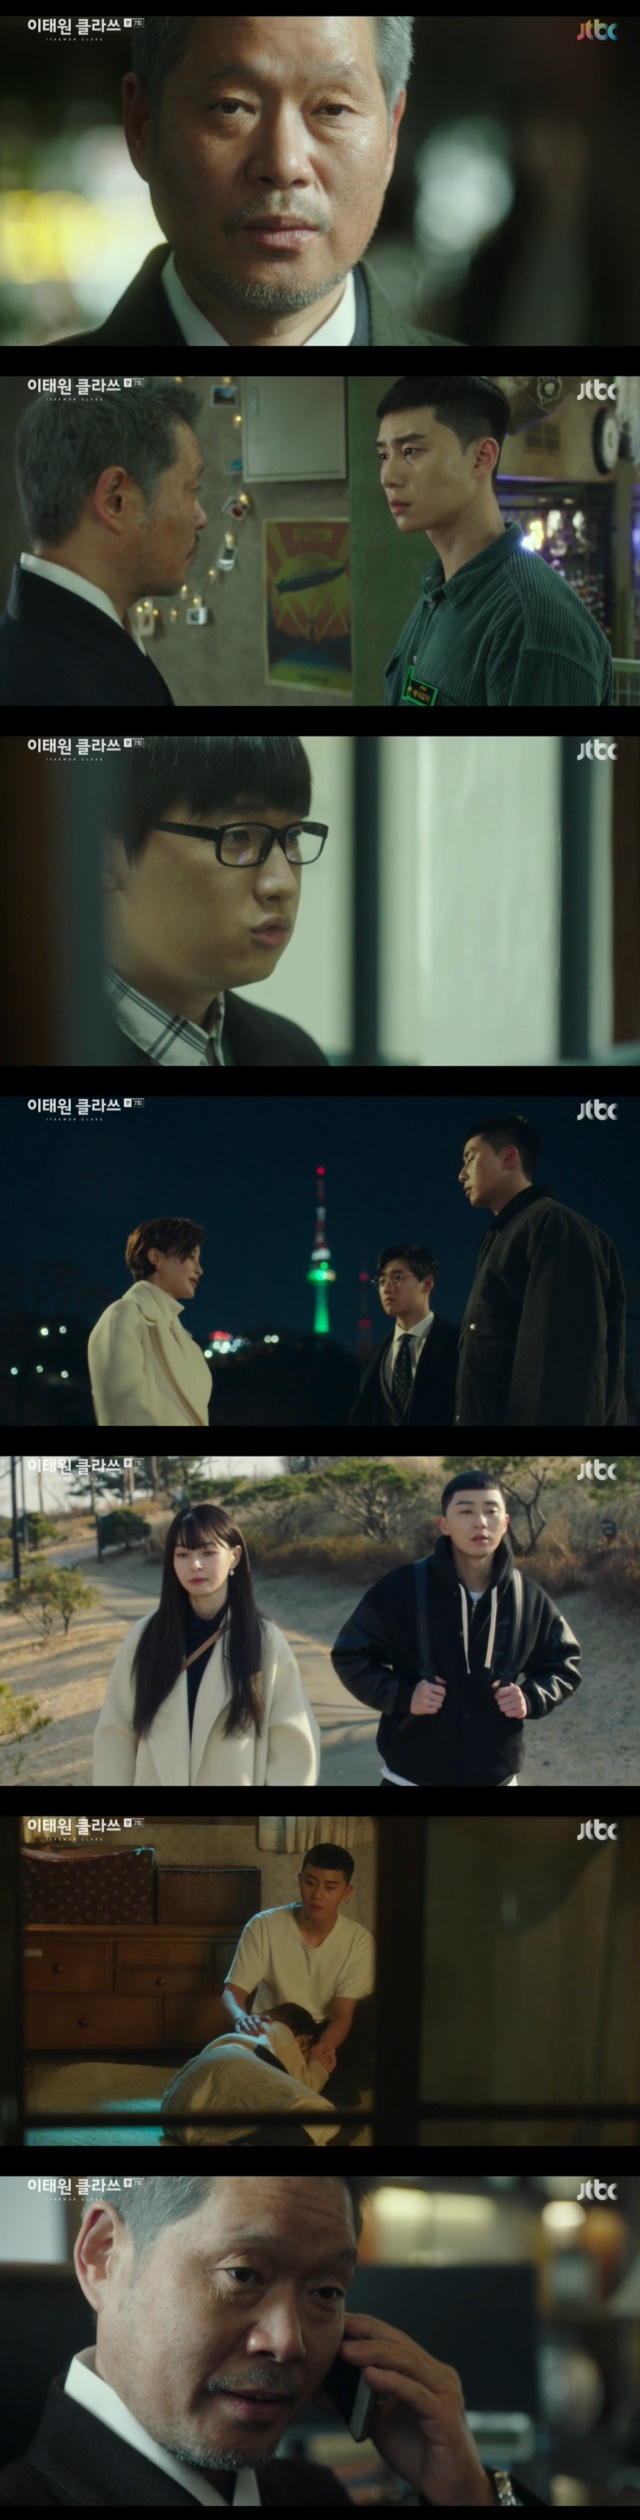 Yoo Jae-myung started to move to trample Park Seo-joon.In the seventh episode of JTBCs Golden Earth Drama Itaewon Klath (playplayed by Cho Kwang-jin/directed by Kim Sung-yoon), which aired on February 21, Jang Dae-hee (played by Yoo Jae-myung), who begins to watch out for Park Seo-joon, was portrayed.When he learned that Park had invested 1.9 billion won in the market, he visited the night with Oh Su-ah (Kwon Nara) and The Fountainhead (Security).Jang asked Roy why he had bought stock eight years ago and recently.The brand image may have been lost, but the value and essence of the market has not changed. I thought it would be money in the long run. Jang Dae-hee warned that he would not be his opponent after tasting sweet-night food and give up and live moderately.What you can do for Father is to get down on your knees and get paid, and I will make it. Jang Dae-hee declared, Go-hee,Ill have to be clubbed. Tigers dont bark. They just bite. Ill teach you what youre saying sooner or later.Joe-yool Lee was worried about Roy, saying he had a hasty fight. Youll see him as a self-indulgent kid.The fight is important, and the fight is to put the bread in the back of the head, he said.Park Sae-sae met Lee Ho-jin (Lee Da-wit).In the past, Lee Ho-jin went to Parks prison and said he was planning to revenge Jean Fountainhead (Security), and they became friends.Park met Kang Min-jung (played by Kim Hye-eun) through Lee Ho-jin.Park suggested to Kang Min-jung that he would give him strength, but Kang Min-jung said, This is different.Your entire store of hundreds of millions of dollars is a minority of stock prices.There is nothing you can do with me. He said that if Jang Dae-hee makes me come to eat at night, I will take the hand of Roy.Jang Dae-hee went to the night and Kang Min-jung decided to take the hand of the bird.But Jang found out that they had met, and called Kang Min-jung, saying, I like you like Family and I like it.You are the only one who believes, so please do well in the future. Osua (Kwon Nara), who happened to meet Park on the road, said that he is doing his best as a long-term person, but he is confused between Jang Dae-hee and Park.I felt like I was responsible for my body in the back of the test center, Park said, referring to the time he had run a few miles to take his university exams.You can be on your side.Joe-yool Lee followed the outgoing roy, who told him, Whats the rush?I dont know anything about stock, the store, the night. Im the manager. You need me. Im willing.If it is a burden, please give it a little bit. Park took Joe-yool Lee to visit Oh Byung-hun (Yoon Kyung-ho), a police officer who had concealed his fathers accident in the past.In the on-going bus, Park told Joe-yool Lee about all the things that had happened, including a bad relationship with the Changga and a plan for revenge.In the appearance of Park, Oh Byung-hun could not hide his discomfort with guilt.Oh apologized to Park on his knees, but Park said that what he could do was reveal the truth and turn himself in.You should be a dignified Father who can support her daughters dream at least, and you should not do that to me, Park said.Joe-yool Lee, who was resting in the room, leaned against Roys knee.Joe-yol Lee, who had seen the wounds on the ocean fishing boat and the scars on the Roy body, shed tears with sadness that he would have been hard alone.Joe-yool Lee realized his love for Roy, with the idea that he would not let Roy hurt alone, and that he would kill everyone who touched him.Lee Ha-na